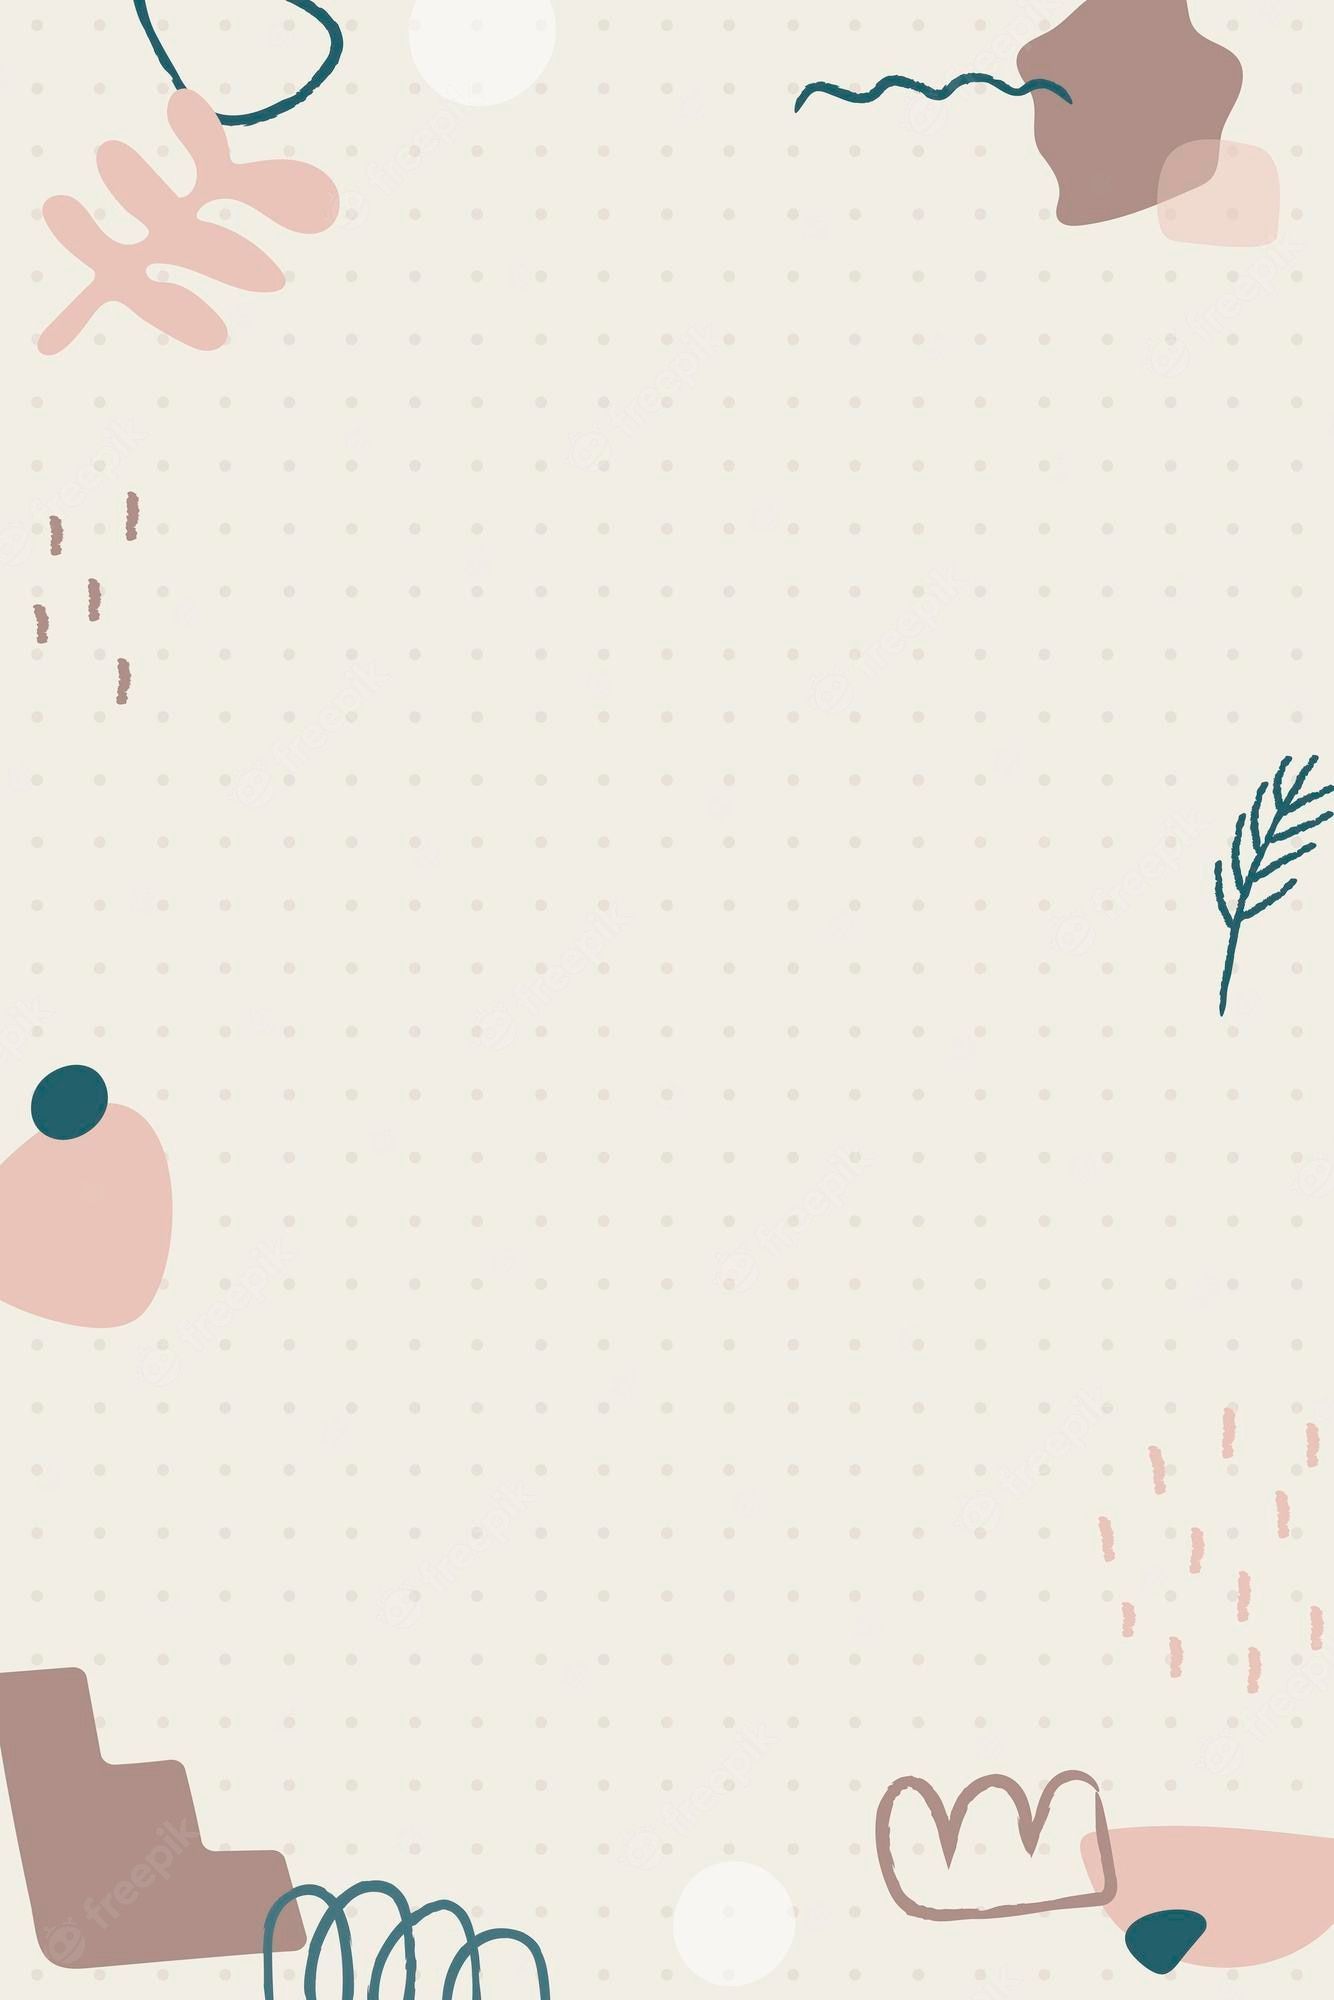 A frame with abstract shapes and plants - Cute, doodles, pretty, vector